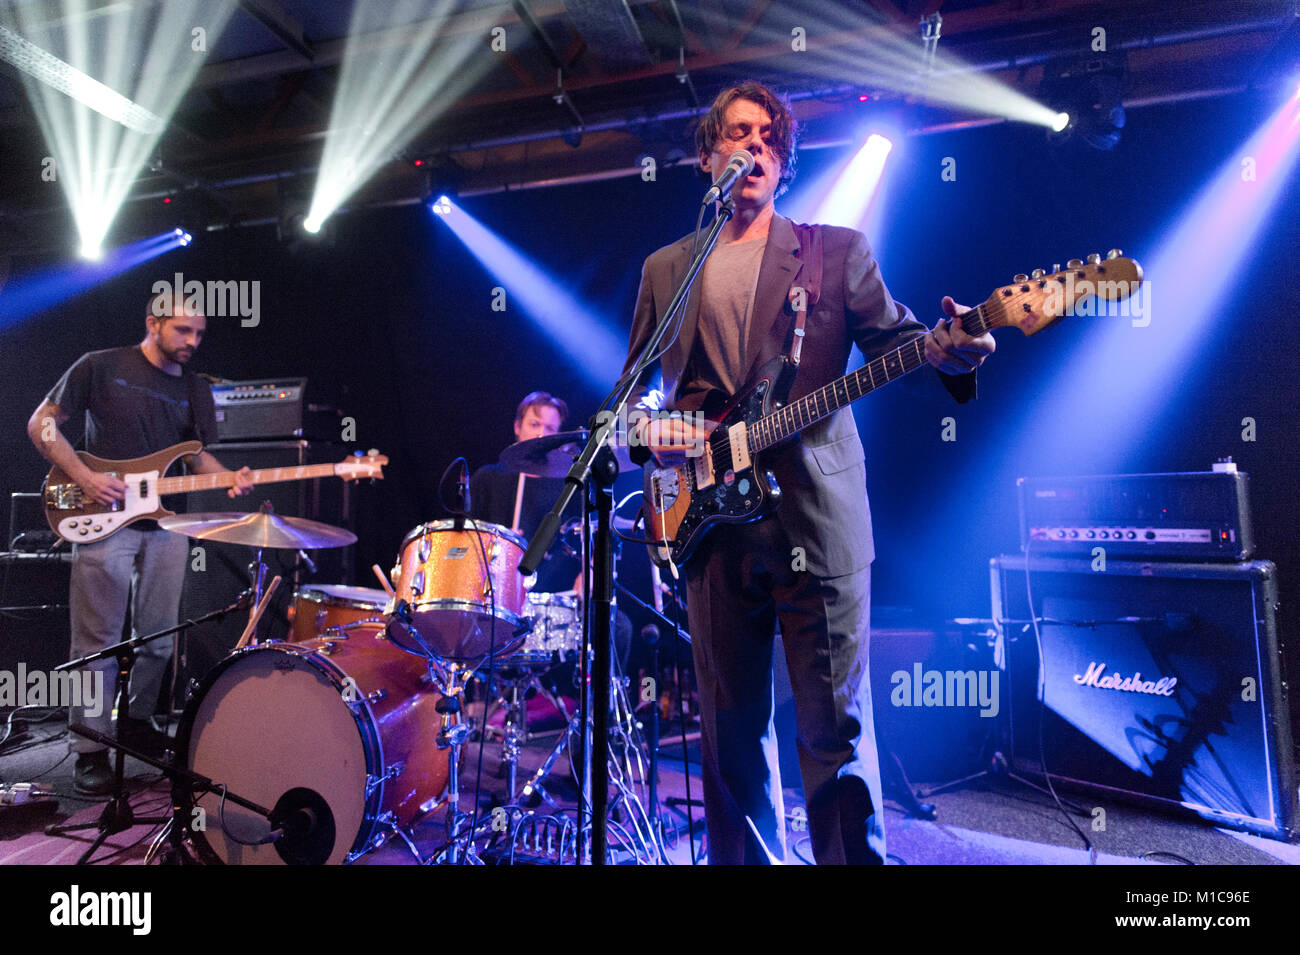 Leeds, UK. 28th Jan, 2018. US rock band Wand play at the Brudenell Social Club, Leeds, UK. Lead singer Cory Hanson in centre. Credit: John Bentley/Alamy Live News Stock Photo